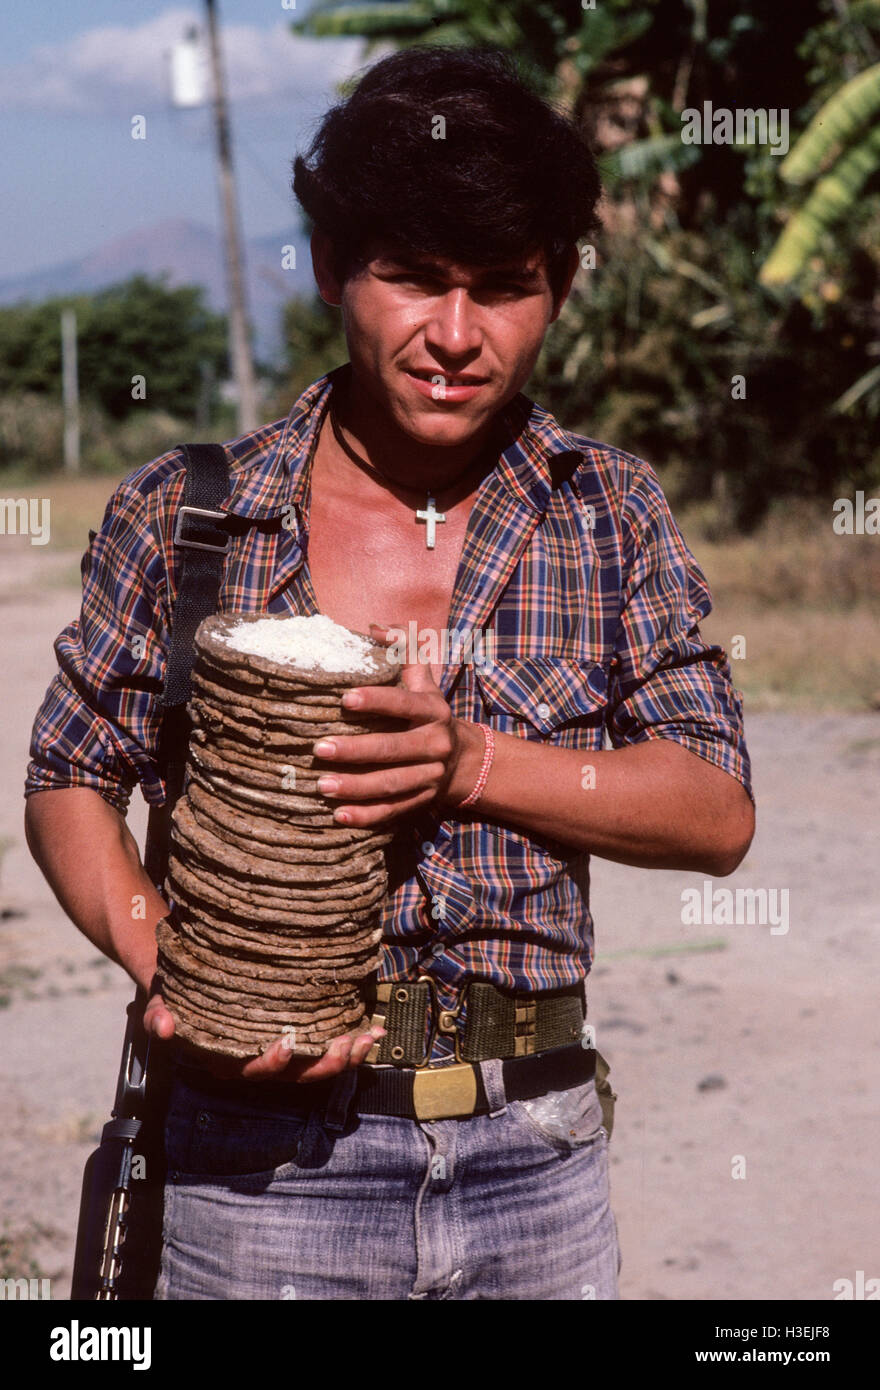 TENANCINGO,  EL SALVADOR, MARCH 1984: - Within the FPL Guerrilla's Zones of Control. An FPL fighter with a stack of tortillas and salt. Stock Photo